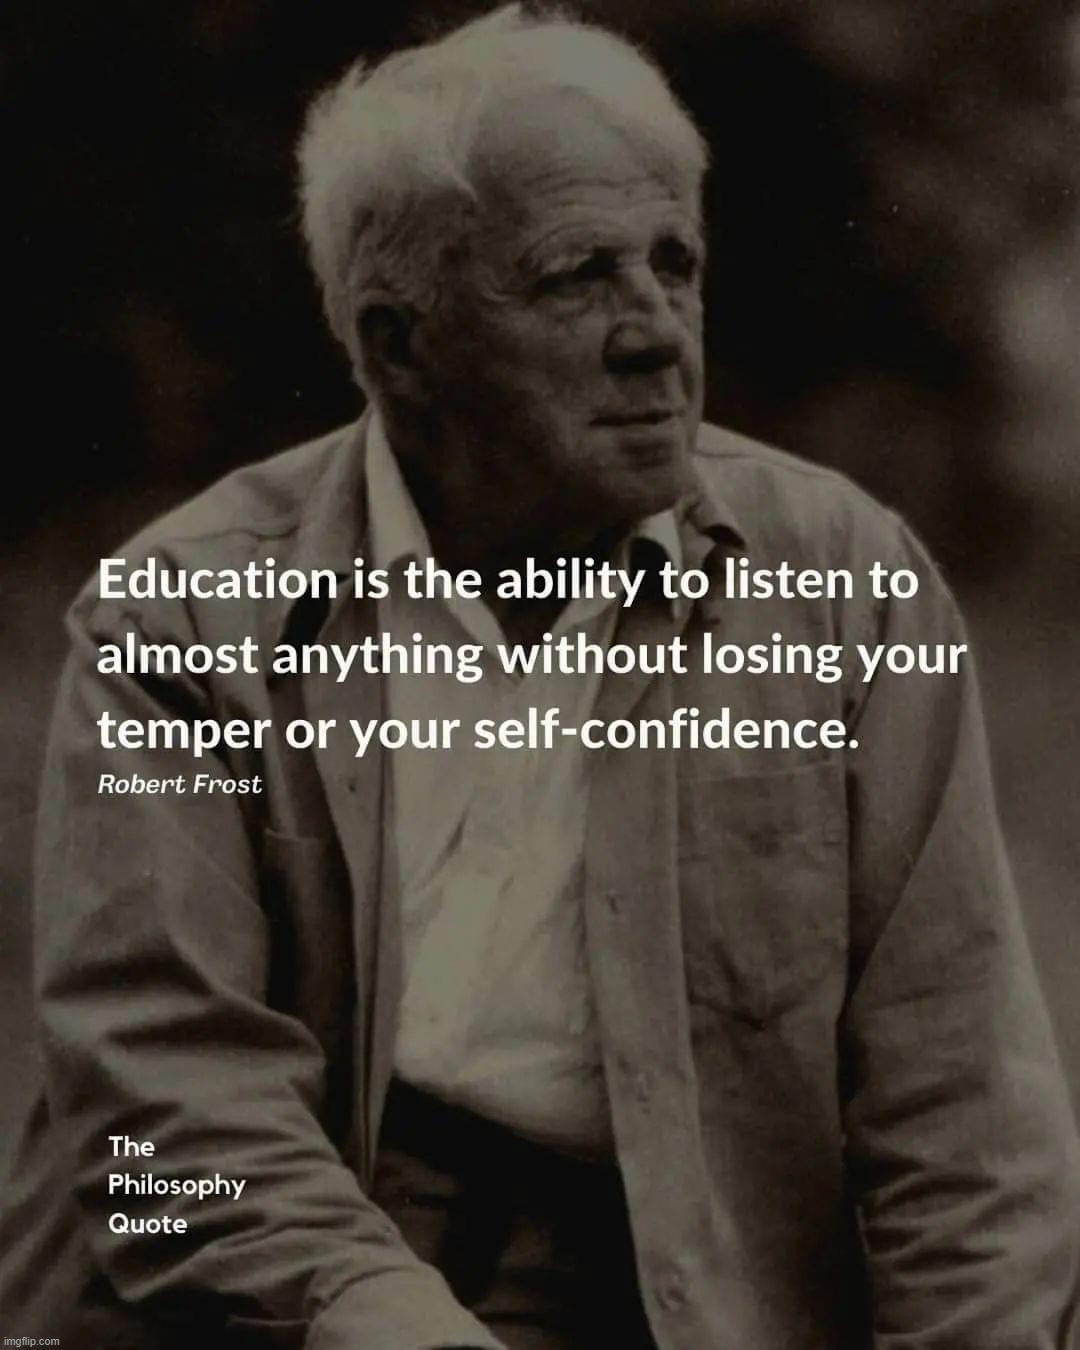 Robert Frost quote | image tagged in robert frost quote | made w/ Imgflip meme maker